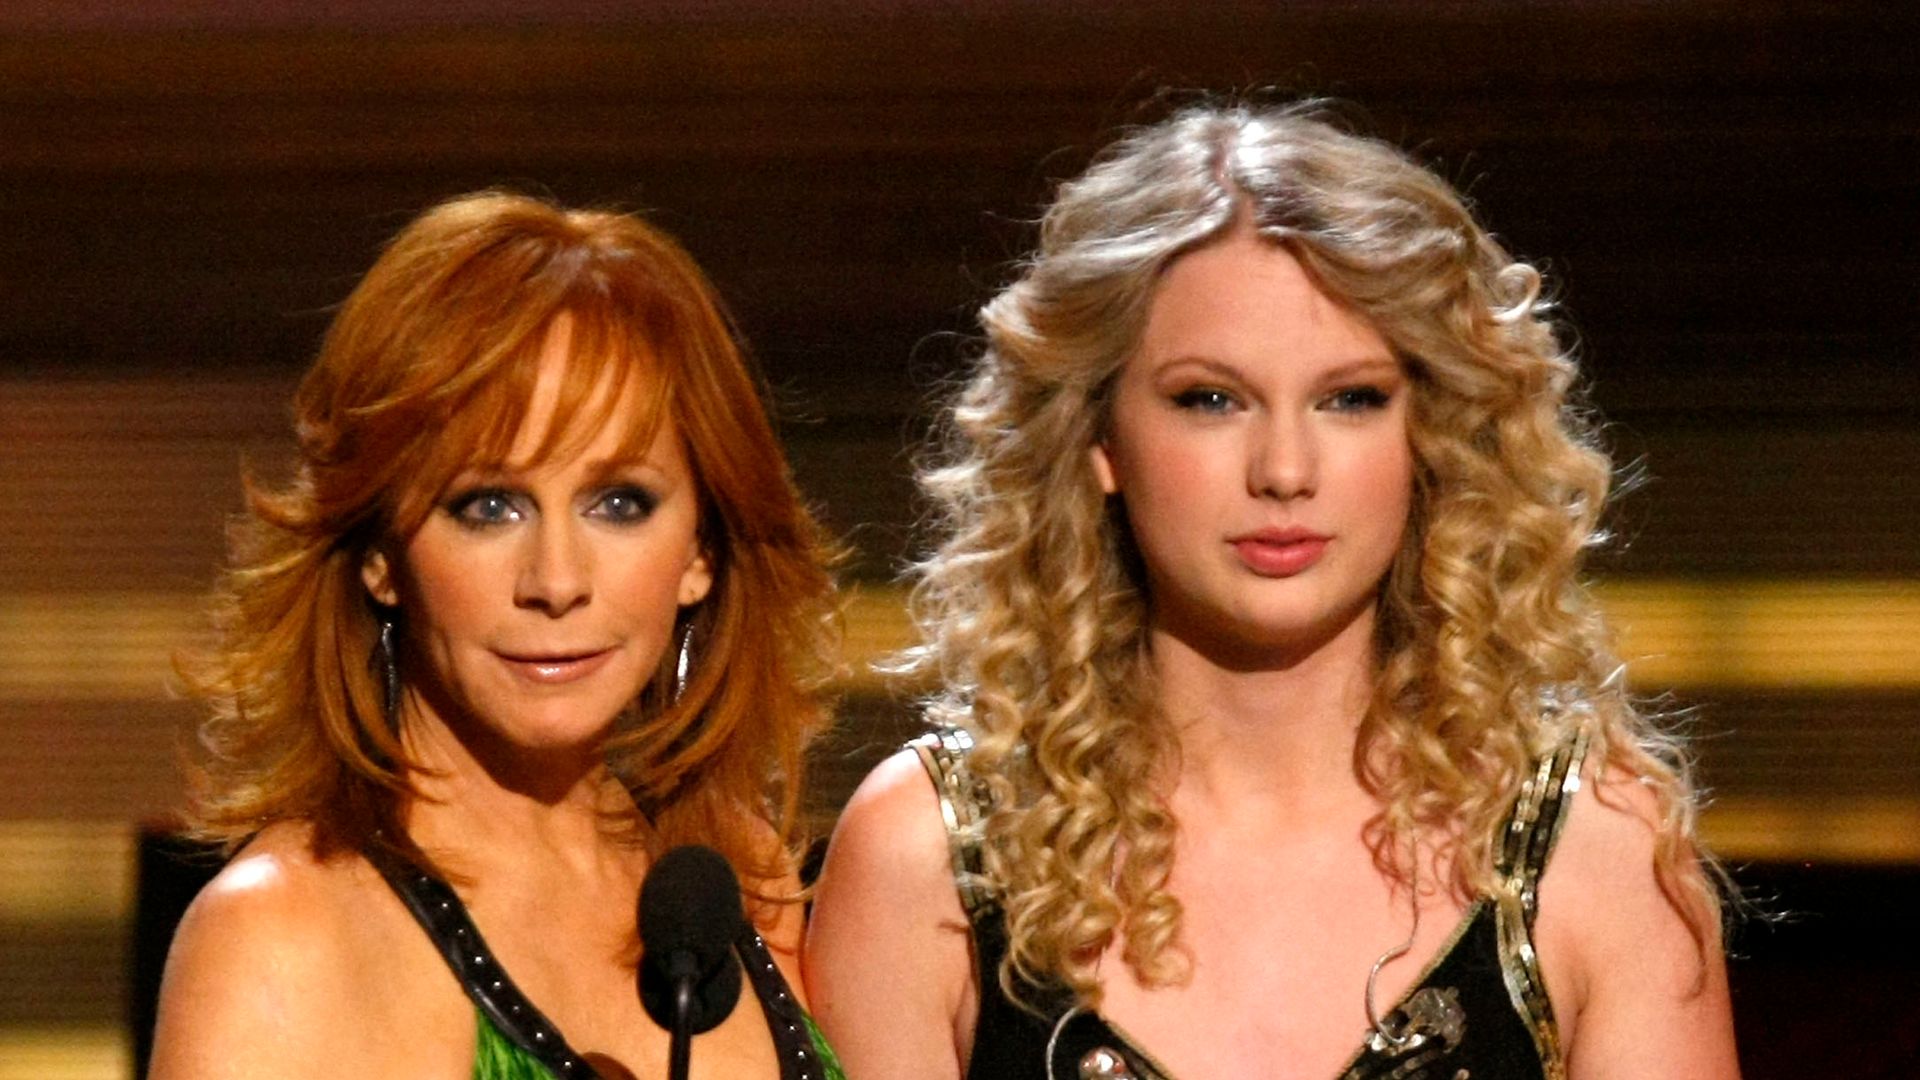 Reba McEntire with Taylor Swift as she accepts the Crystal Milestone Award onstage during the 44th annual Academy Of Country Music Awards held at the MGM Grand on April 5, 2009 in Las Vegas, Nevada